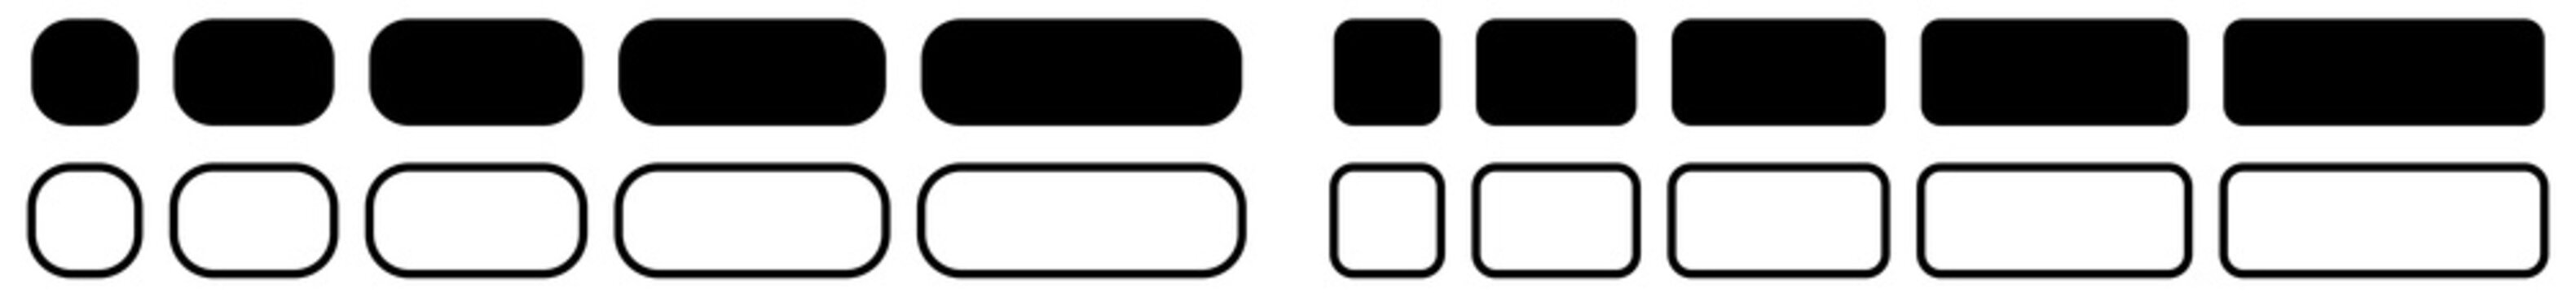 Simple rounded corners rectangles icons set - can be used as buttons